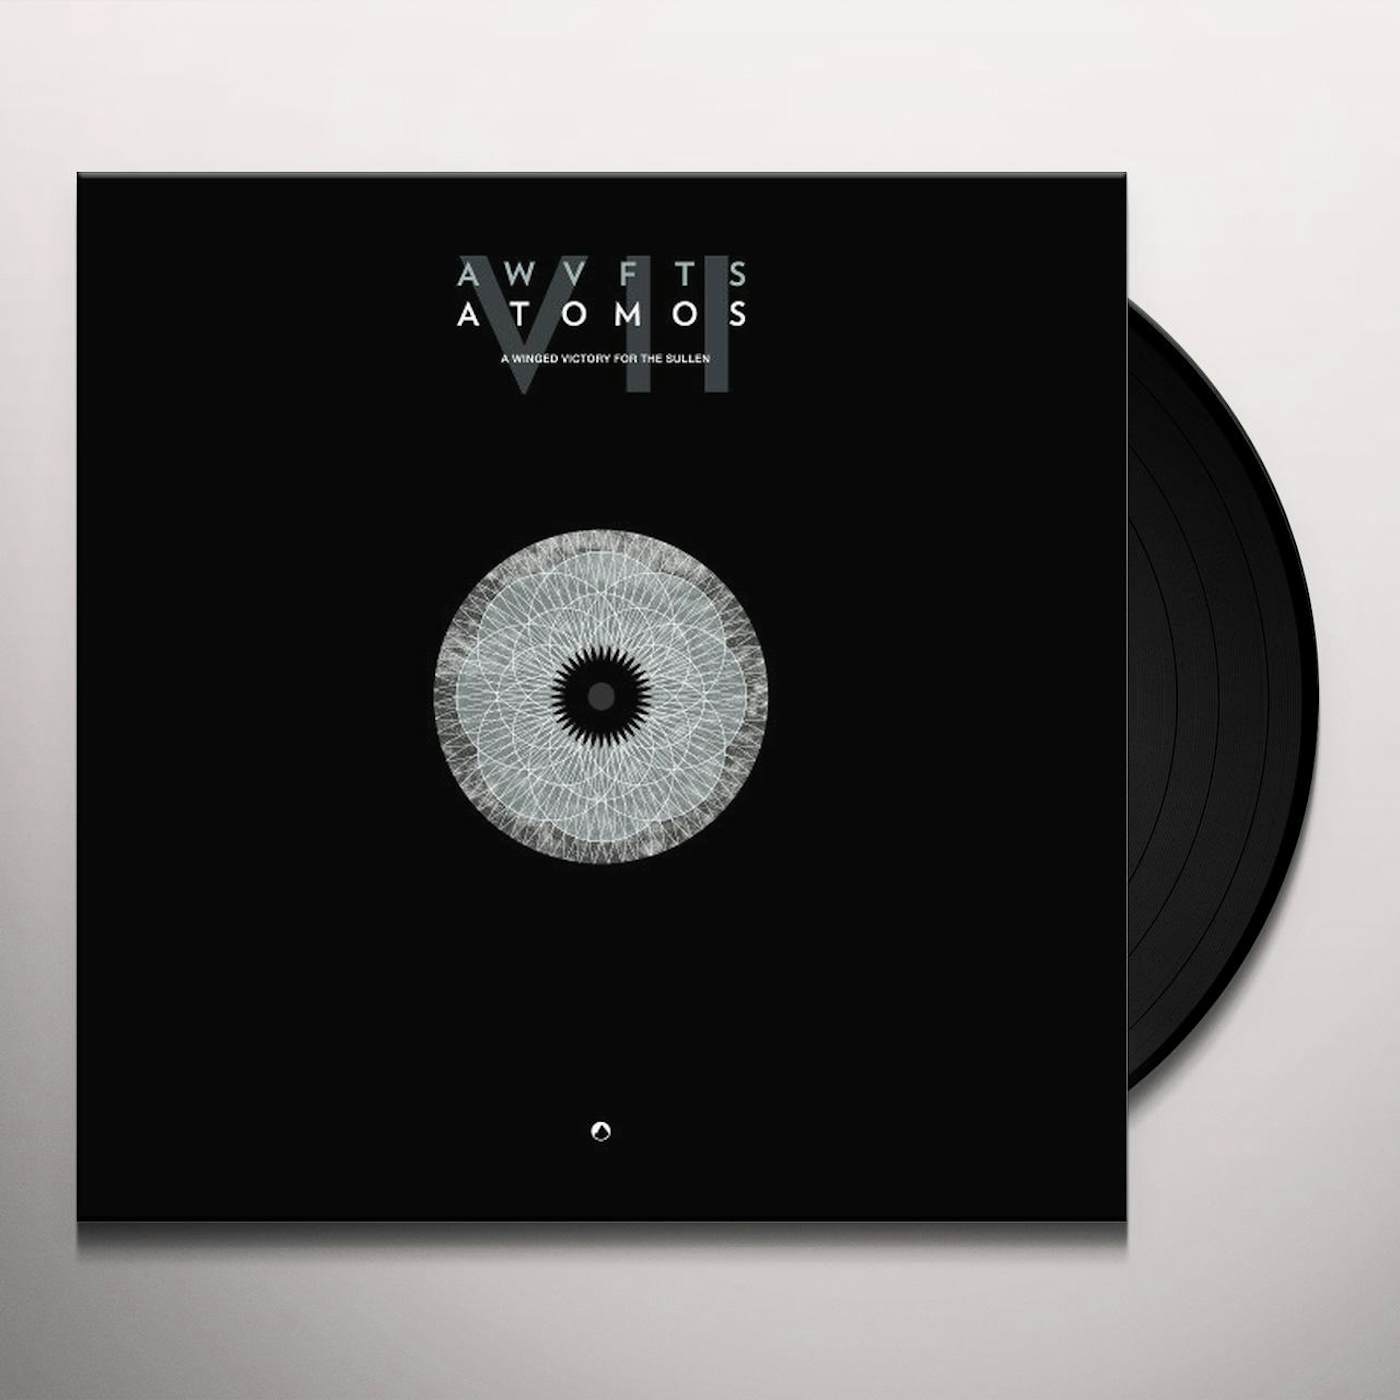 A Winged Victory for the Sullen ATOMOS VII Vinyl Record